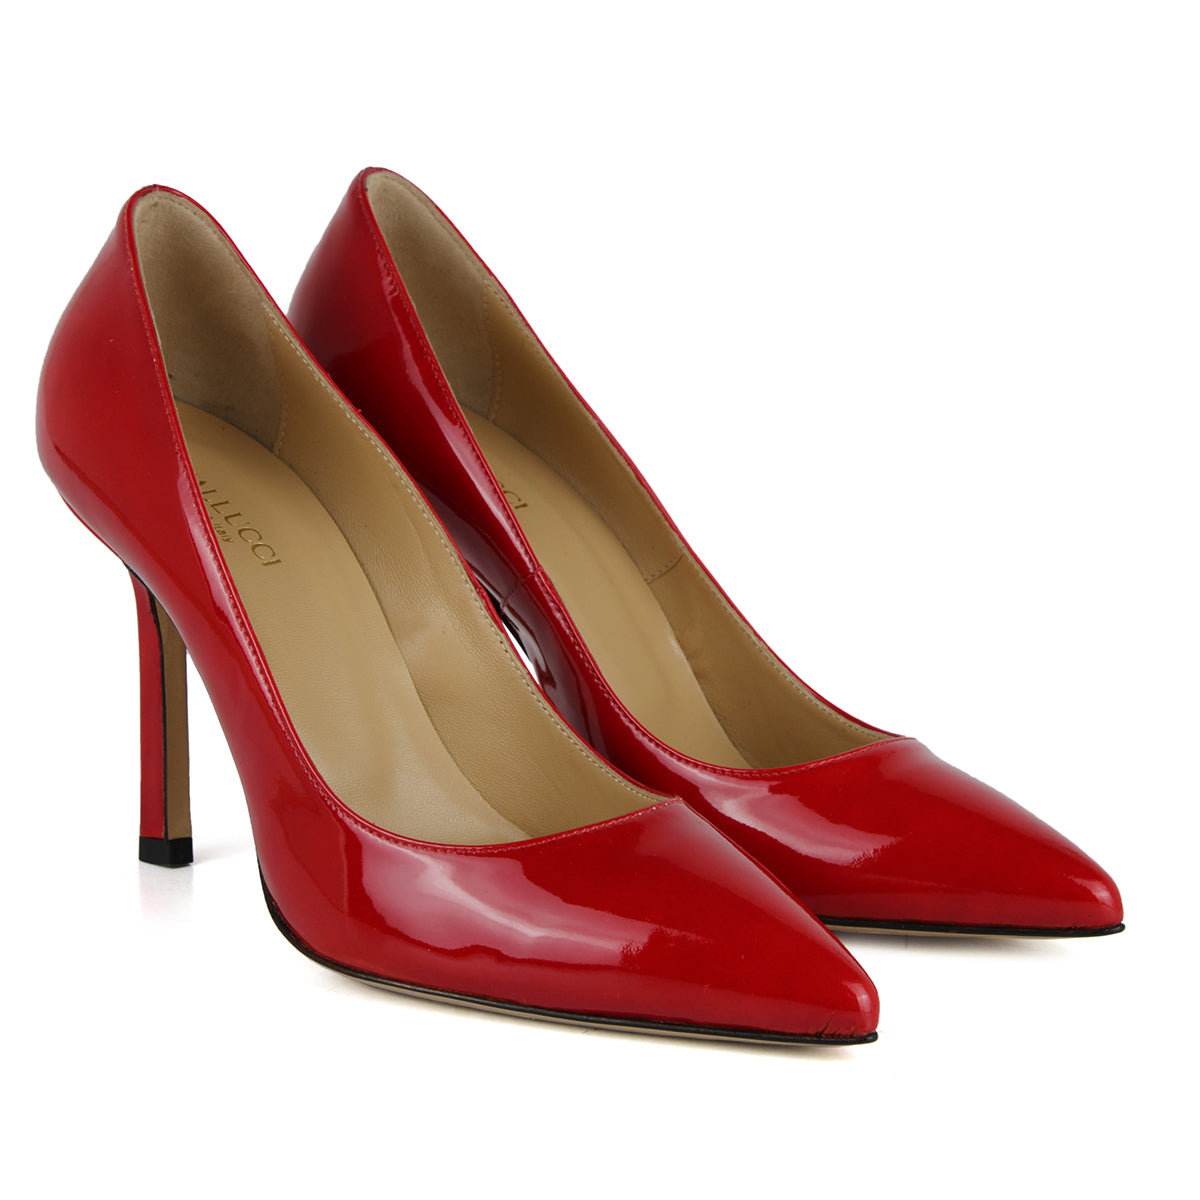 Décolleté in red patent leather